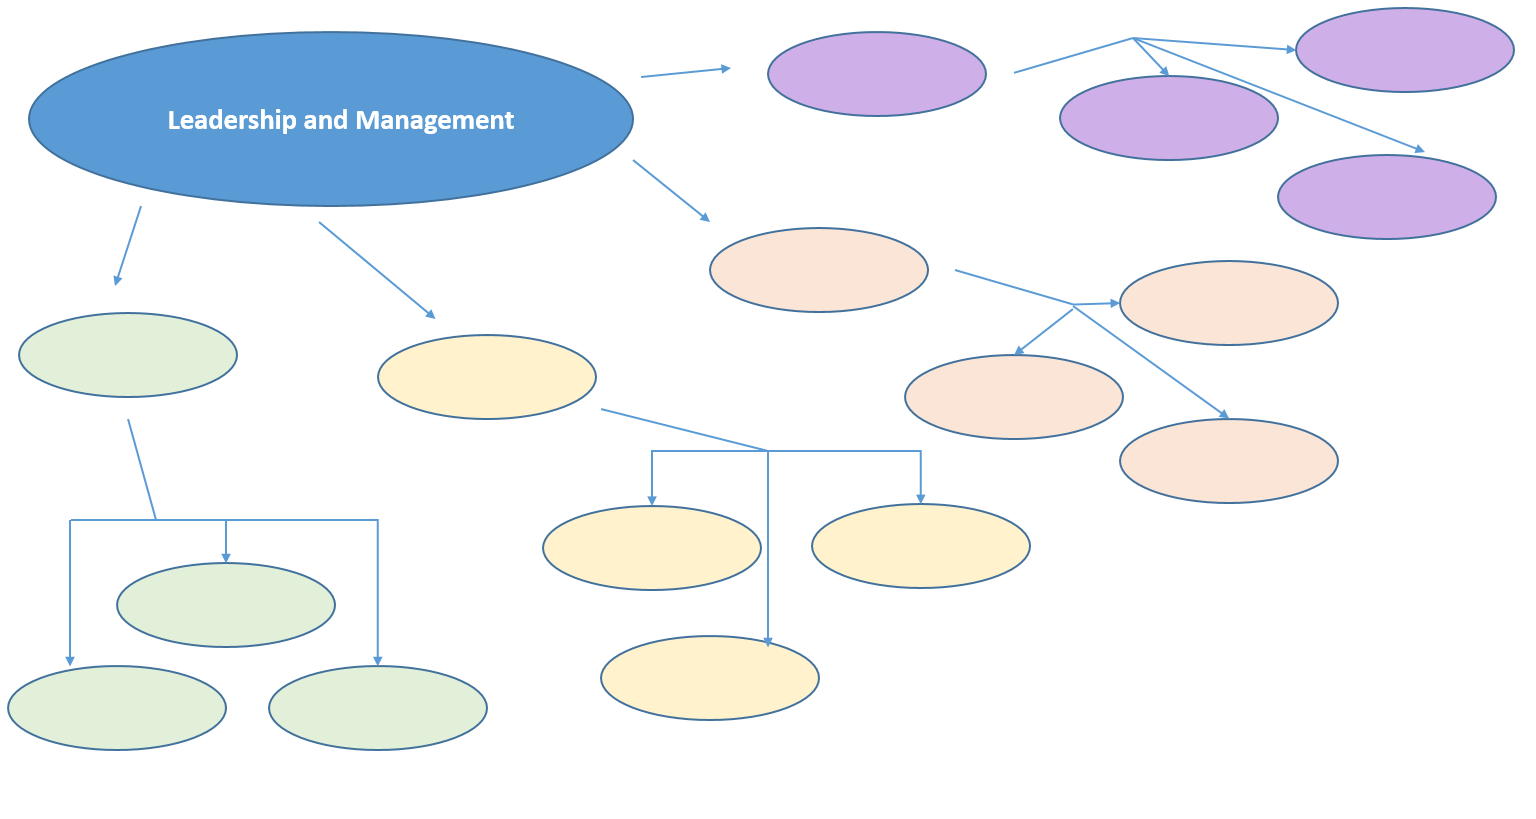 Template for Leadership and Management Concept Map